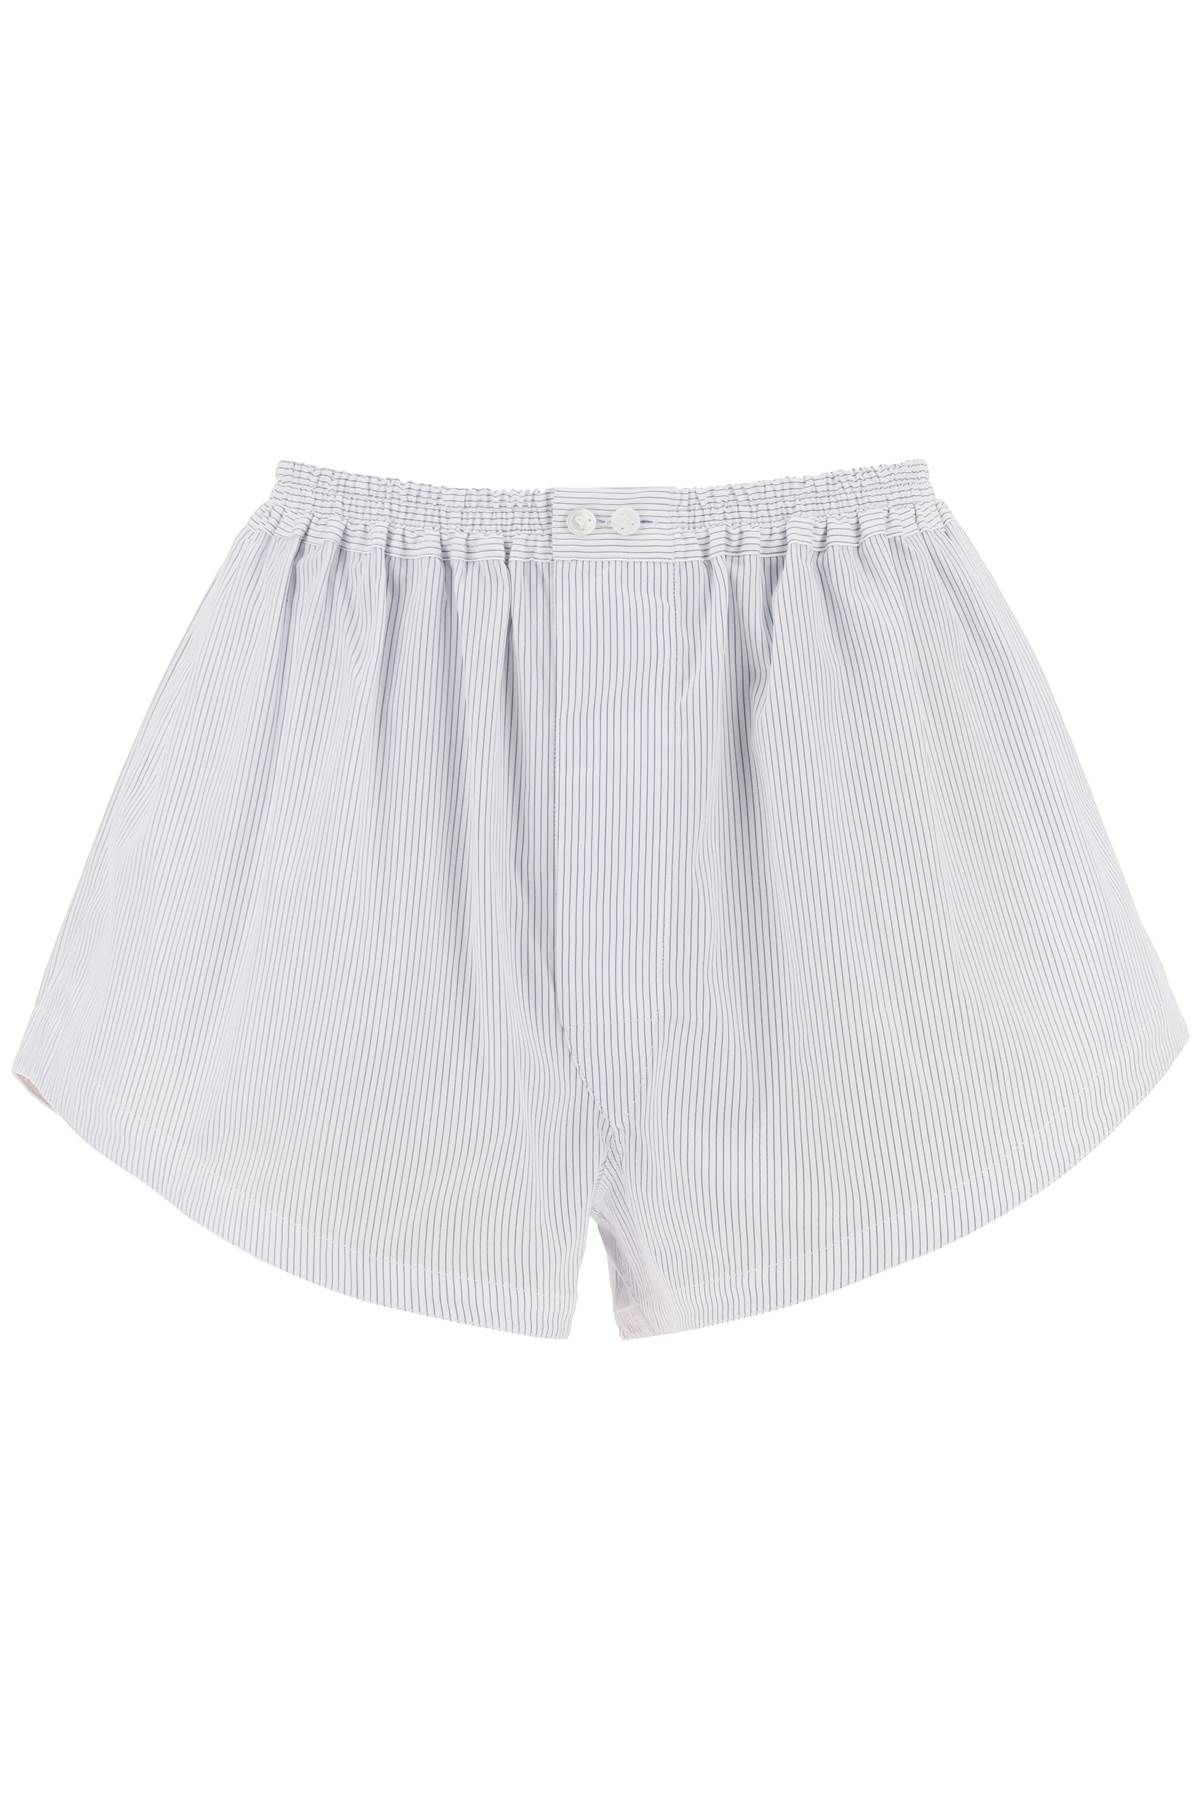 Alaïa Boxer Shorts Made Of Pop In White